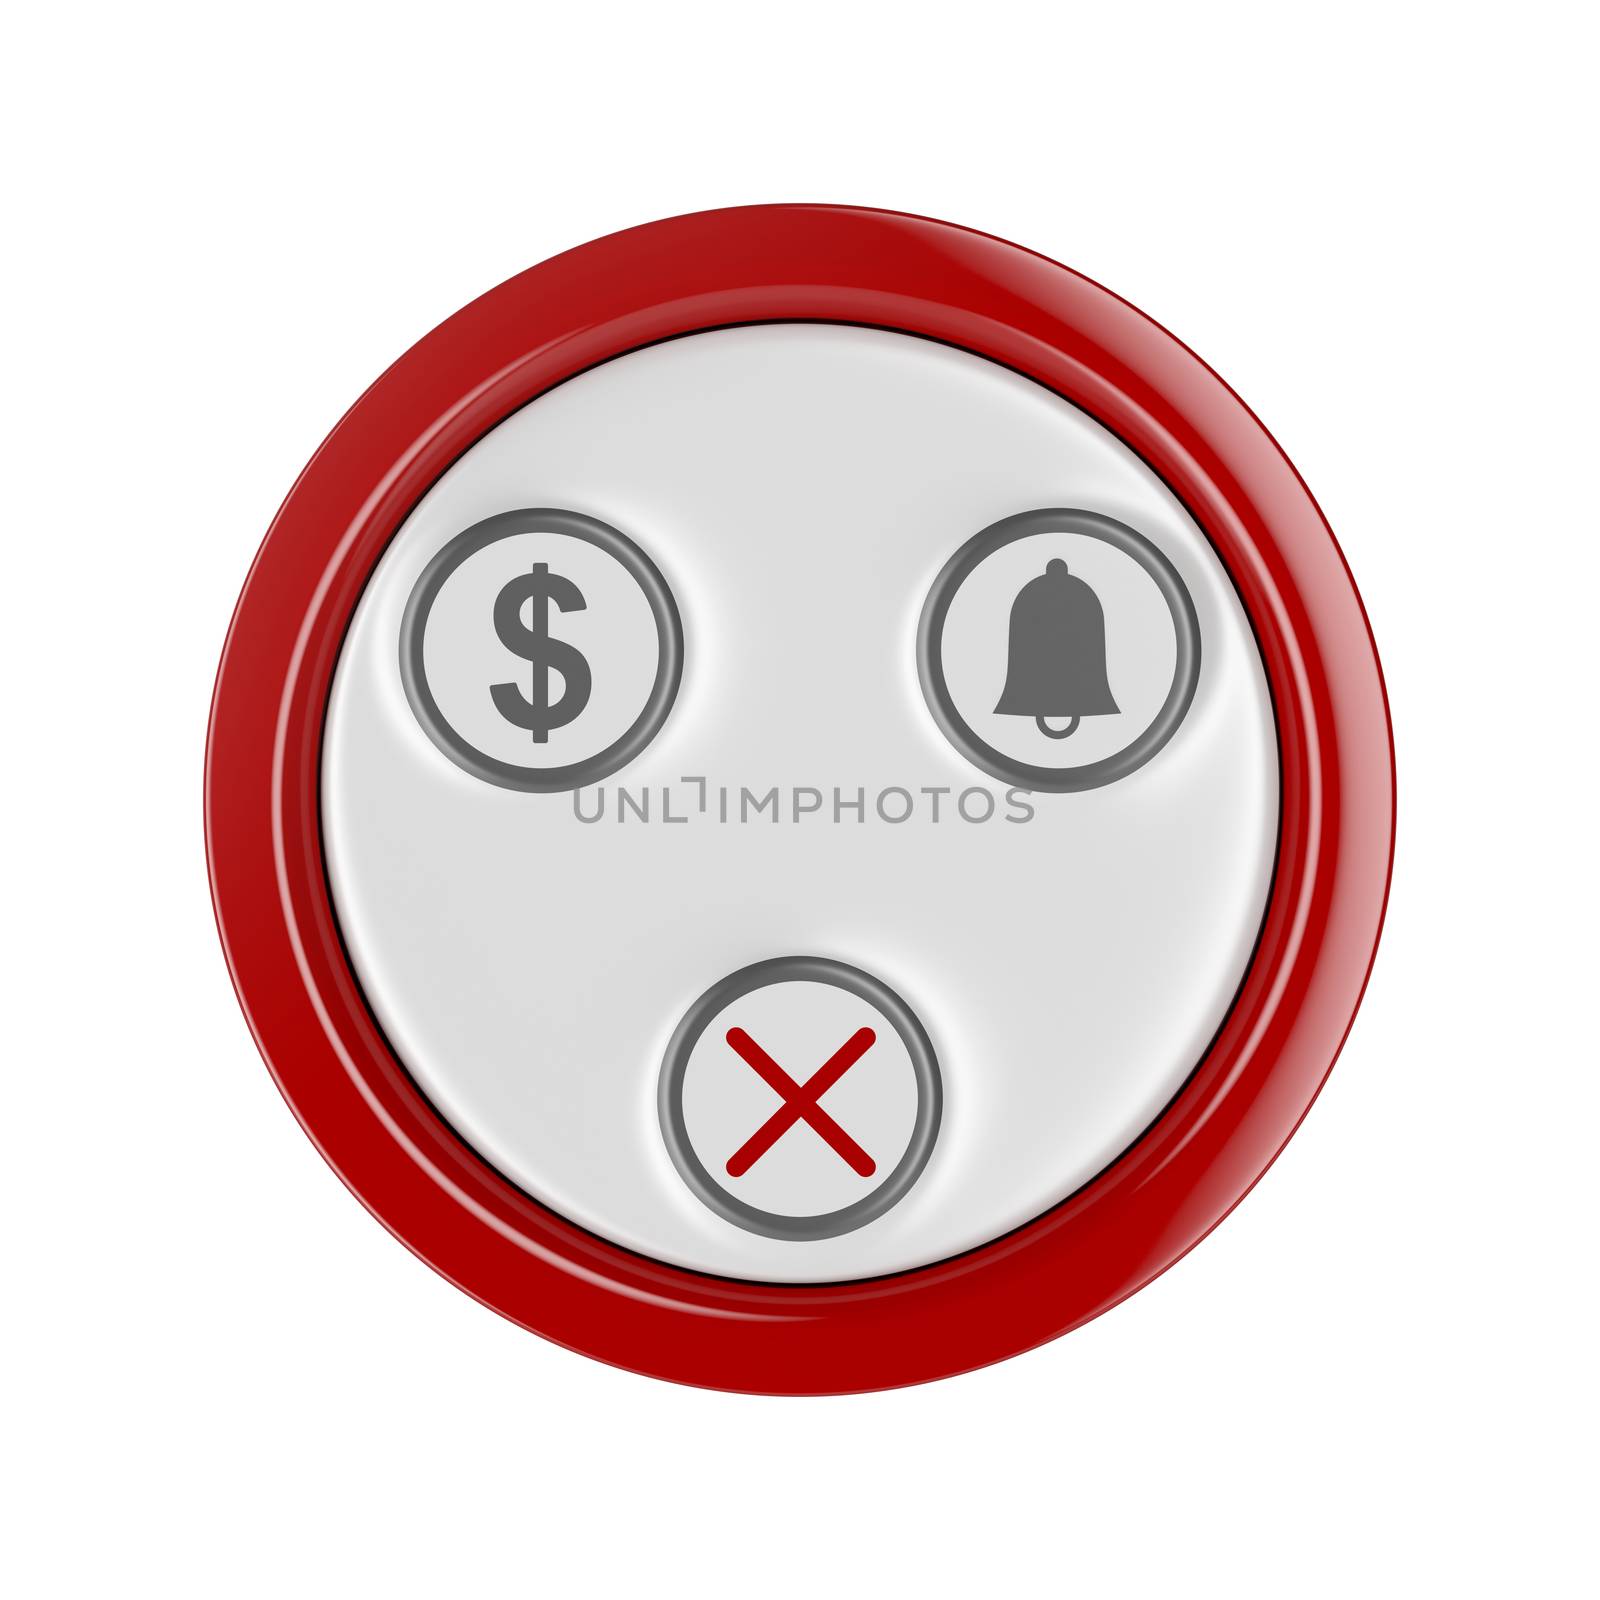 Restaurant table call button, isolated on white background